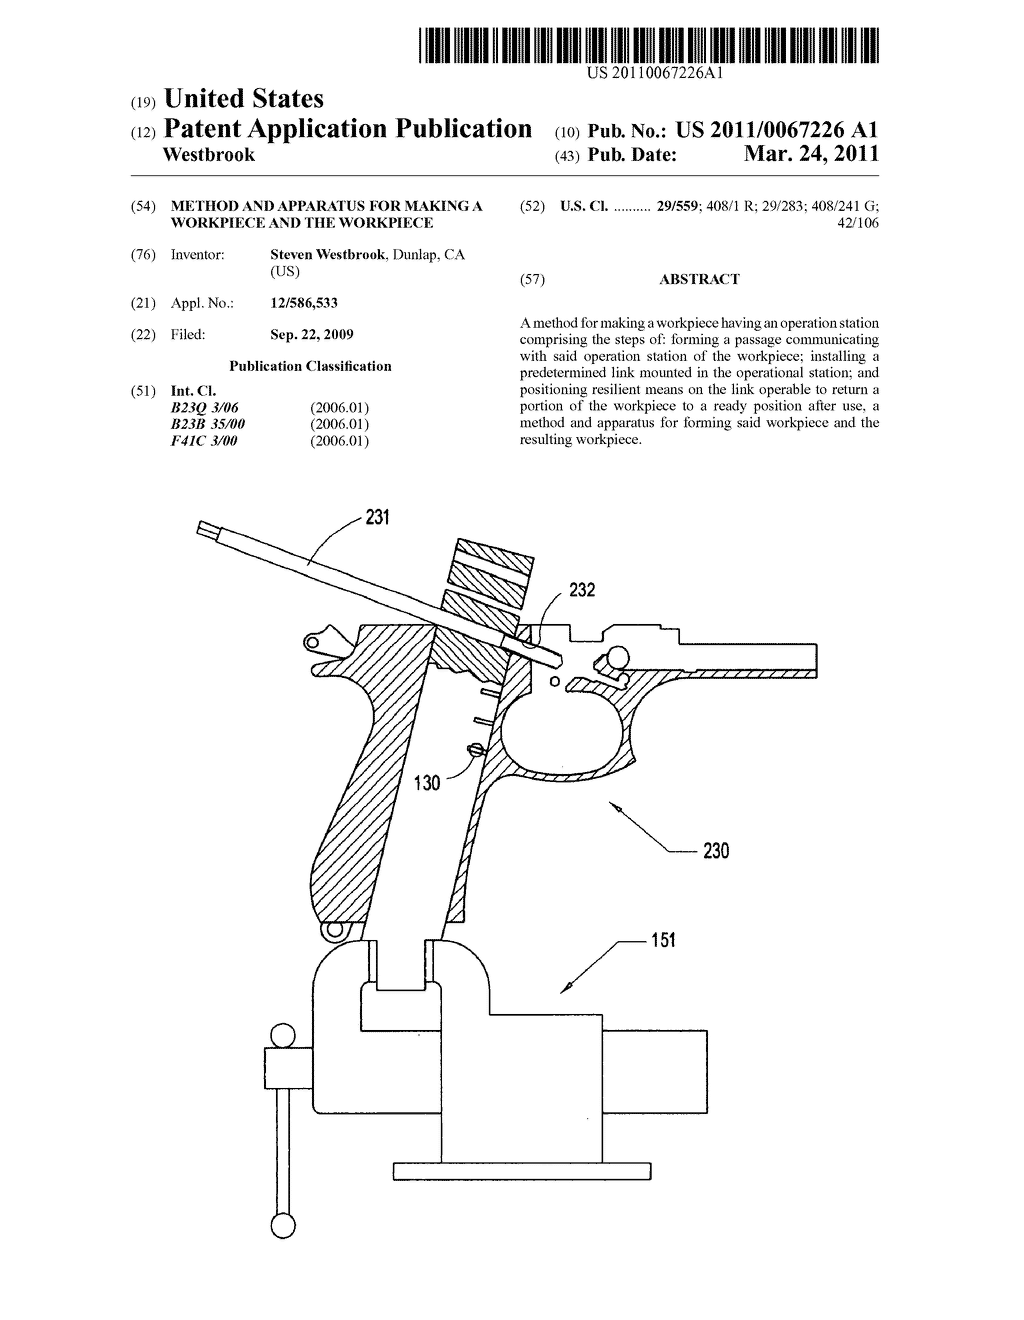 Method and apparatus for making a workpiece and the workpiece - diagram, schematic, and image 01